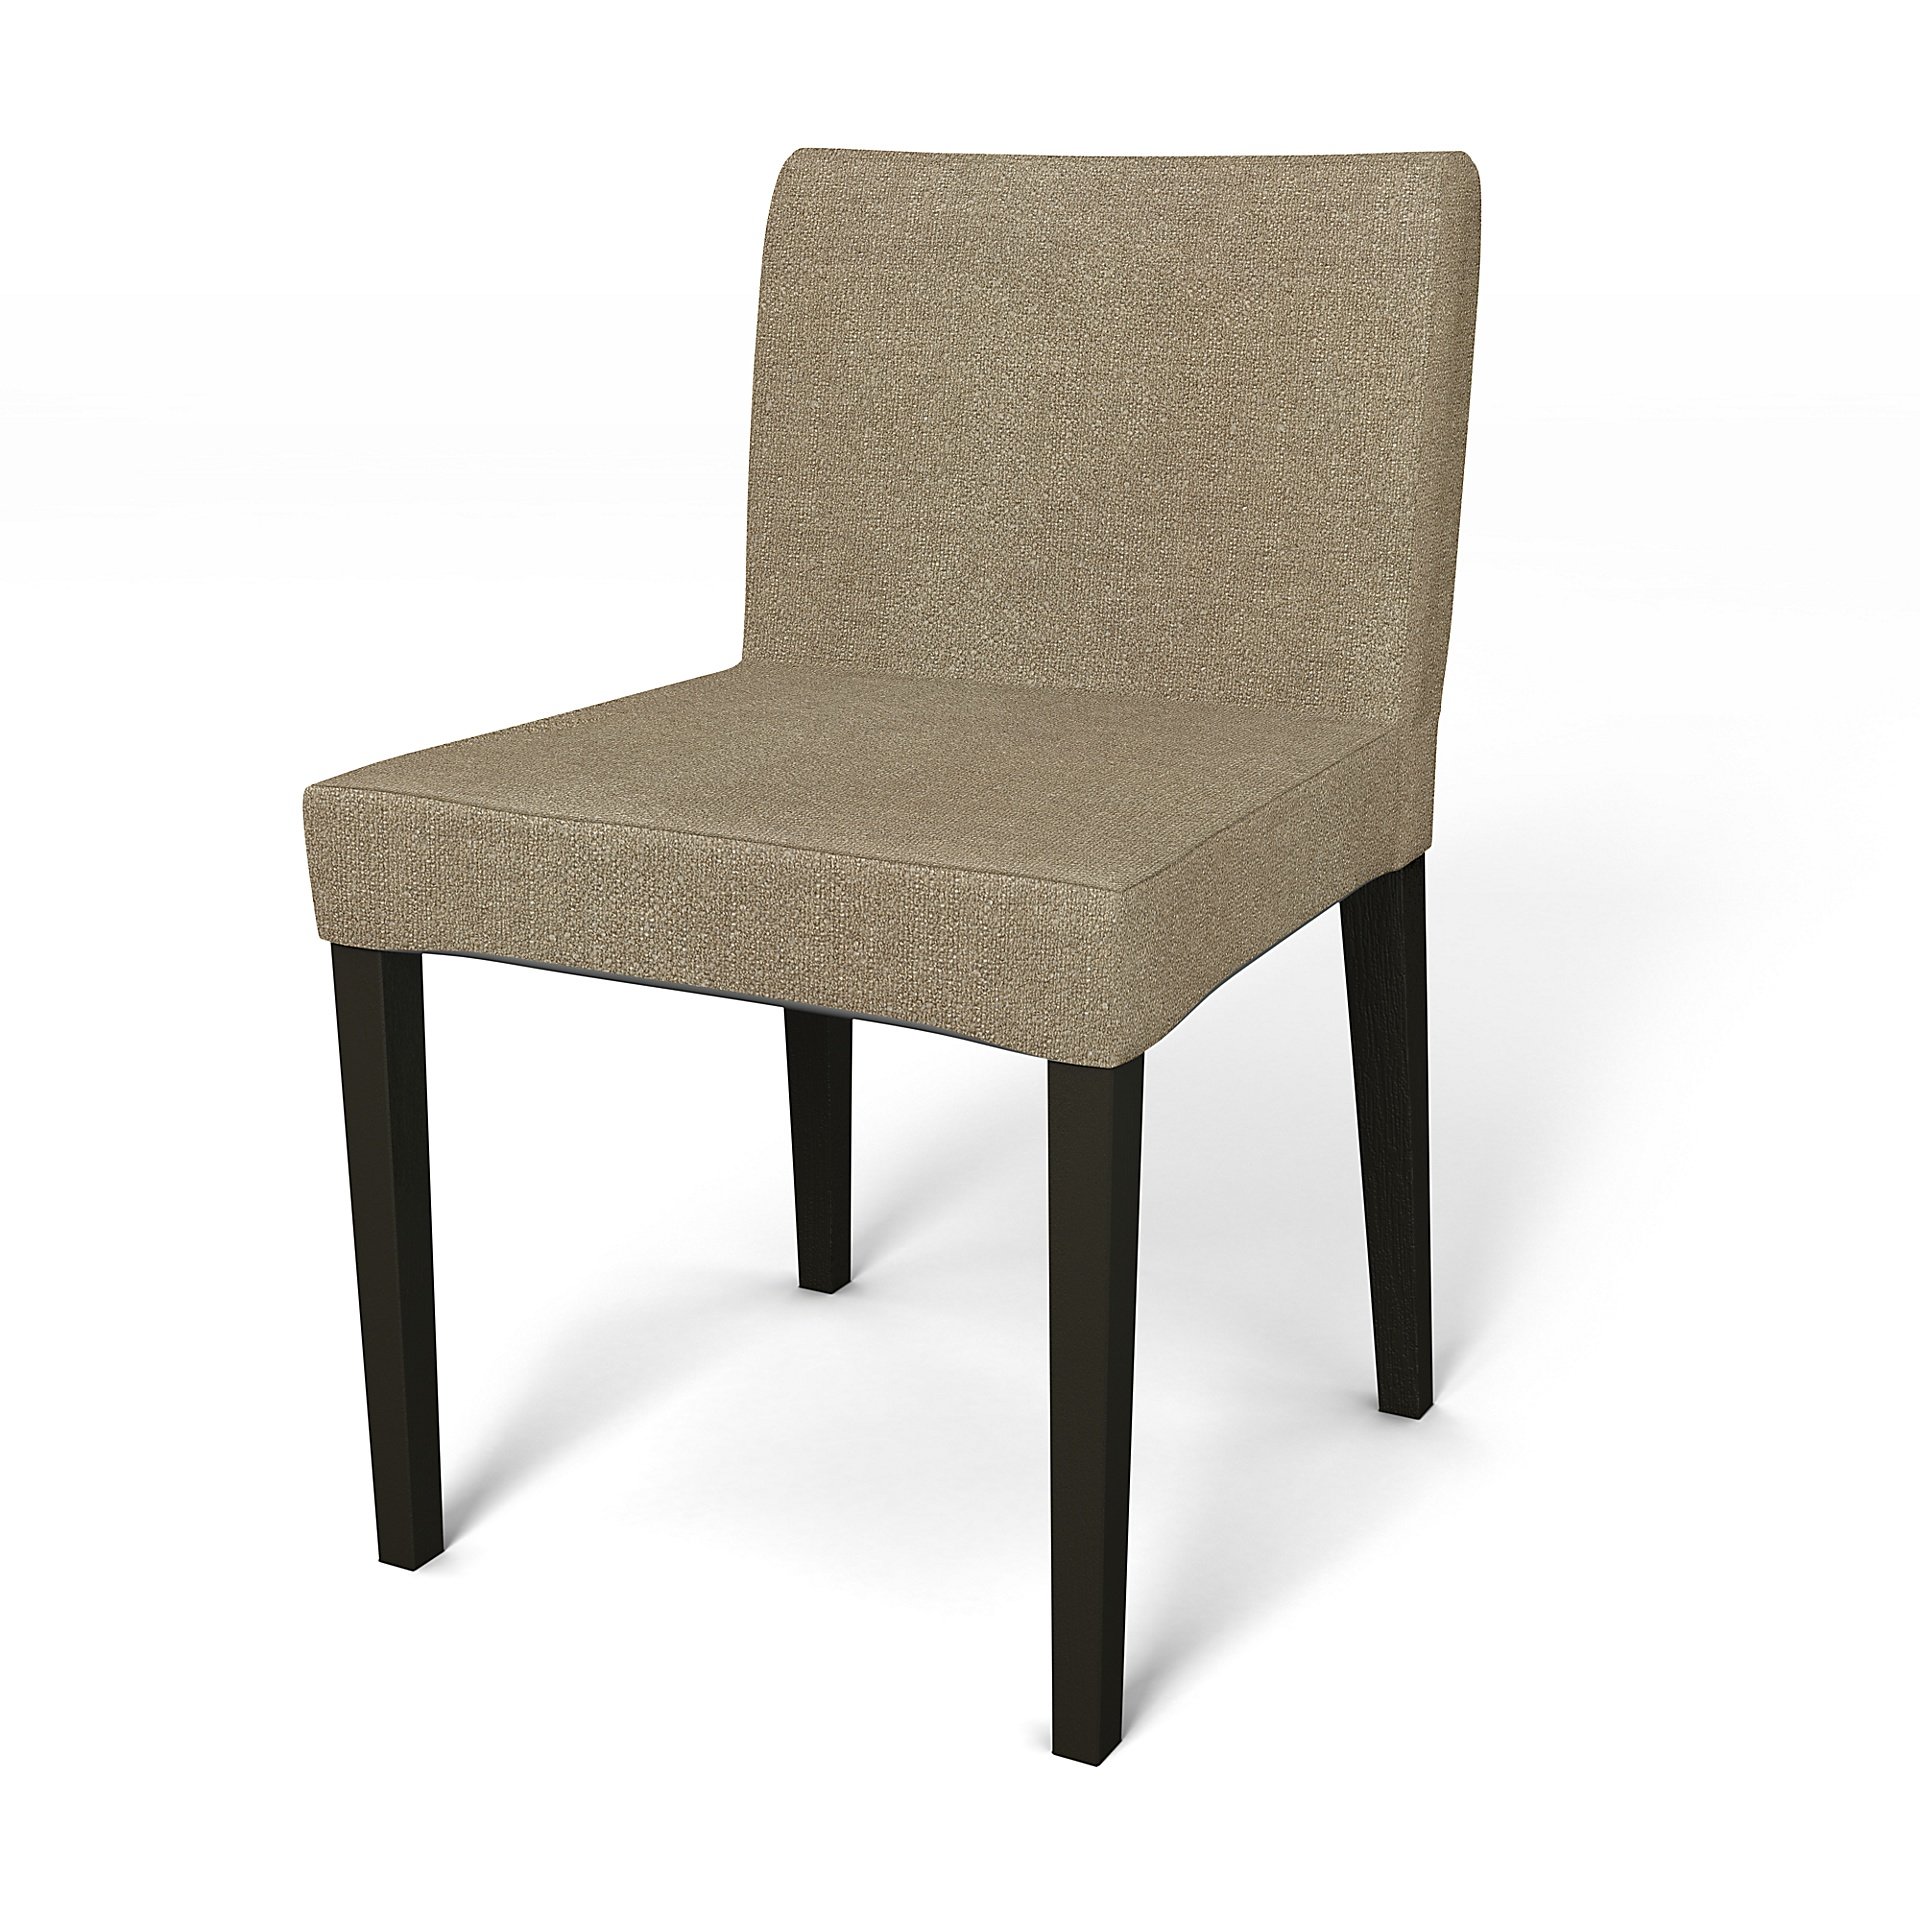 IKEA - Nils Dining Chair Cover, Pebble, Boucle & Texture - Bemz